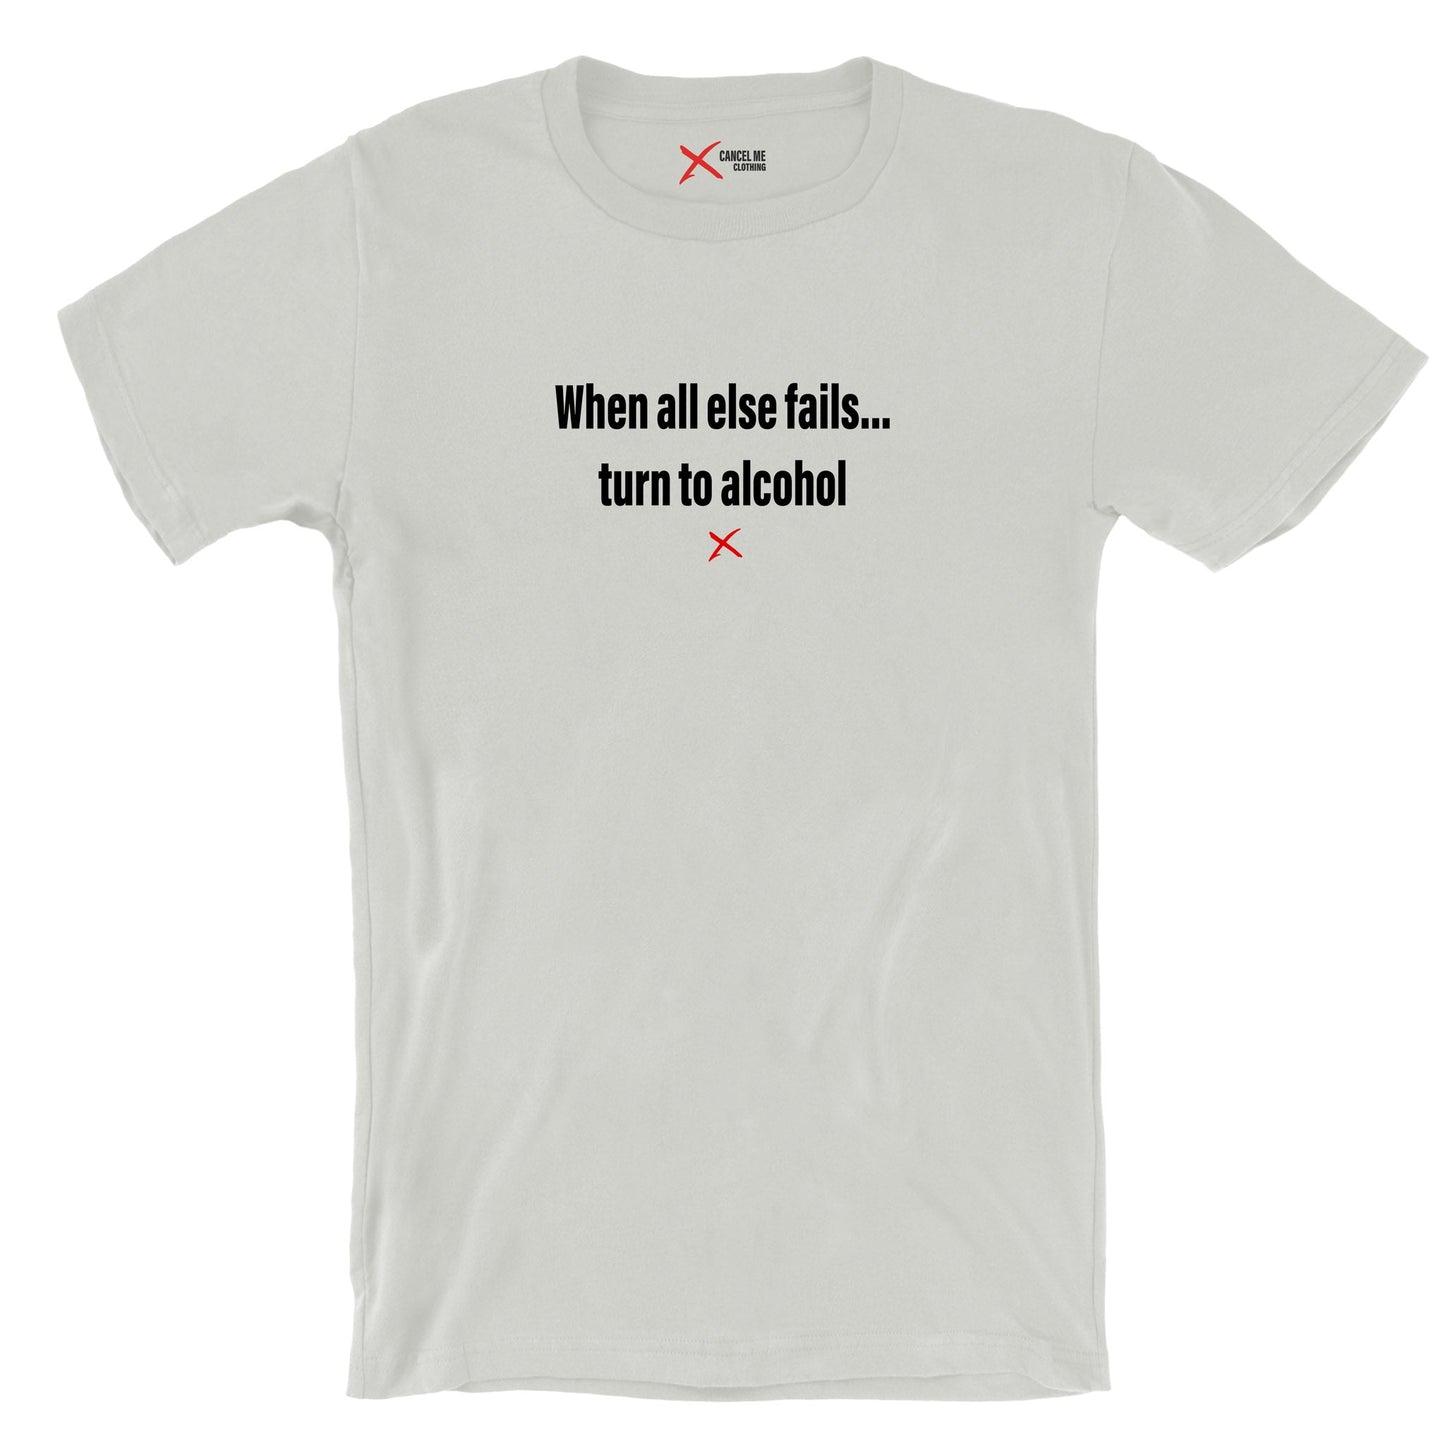 When all else fails... turn to alcohol - Shirt